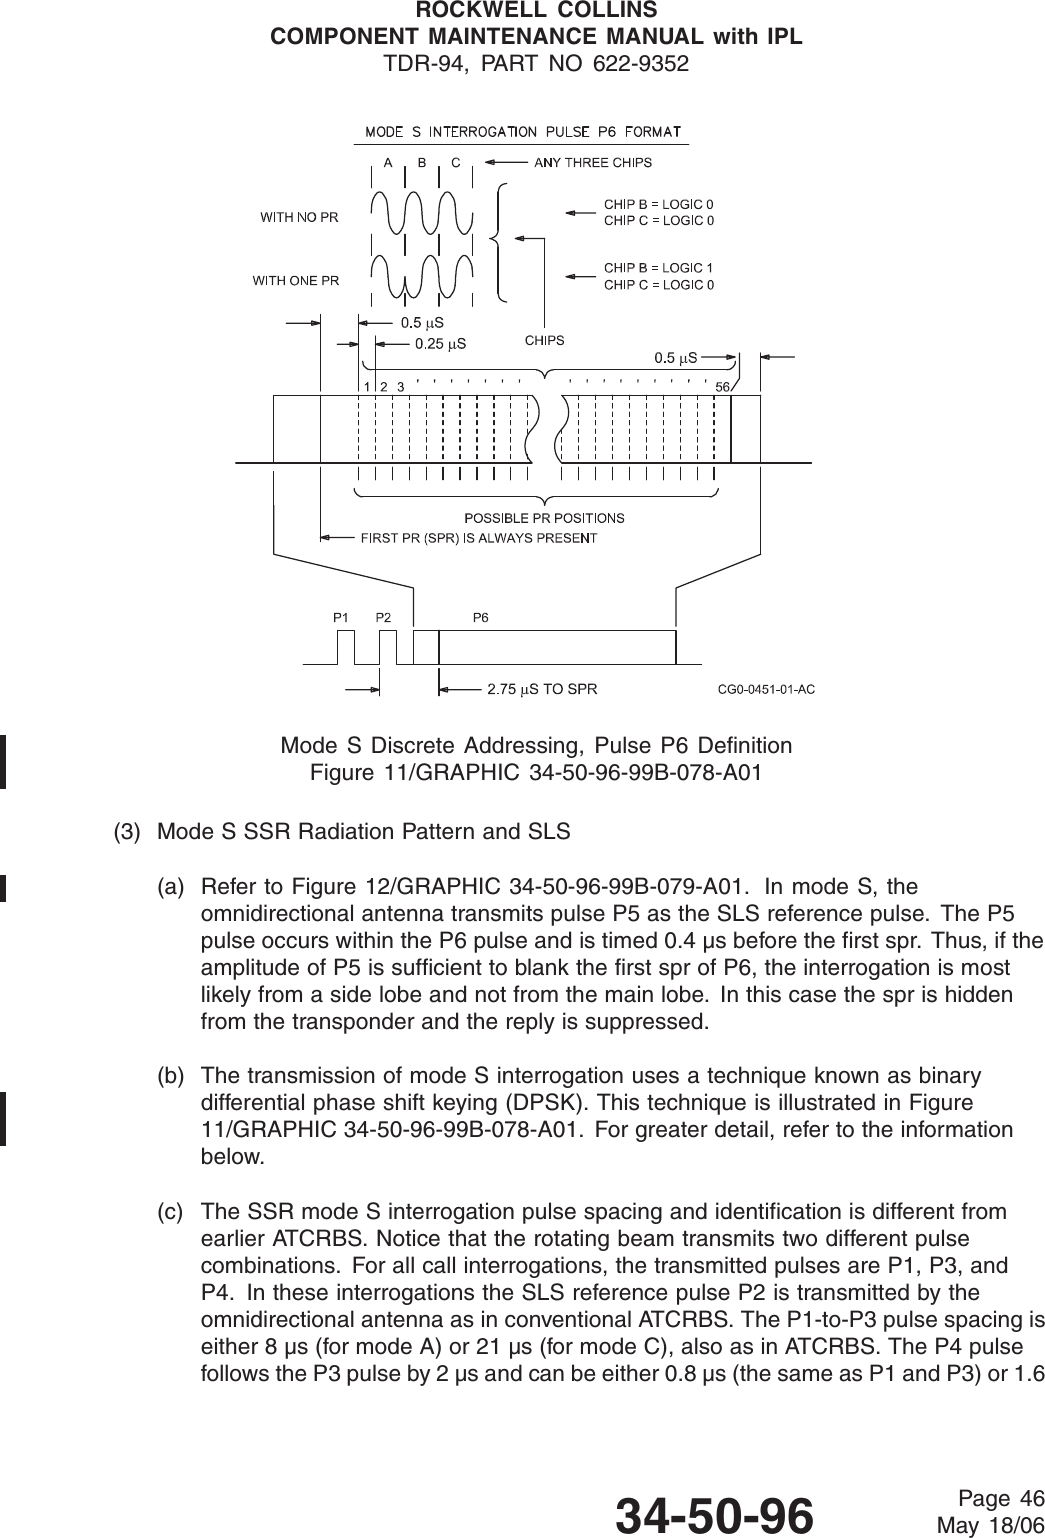 ROCKWELL COLLINSCOMPONENT MAINTENANCE MANUAL with IPLTDR-94, PART NO 622-9352Mode S Discrete Addressing, Pulse P6 DefinitionFigure 11/GRAPHIC 34-50-96-99B-078-A01(3) Mode S SSR Radiation Pattern and SLS(a) Refer to Figure 12/GRAPHIC 34-50-96-99B-079-A01. In mode S, theomnidirectional antenna transmits pulse P5 as the SLS reference pulse. The P5pulse occurs within the P6 pulse and is timed 0.4 μs before the first spr. Thus, if theamplitude of P5 is sufficient to blank the first spr of P6, the interrogation is mostlikely from a side lobe and not from the main lobe. In this case the spr is hiddenfrom the transponder and the reply is suppressed.(b) The transmission of mode S interrogation uses a technique known as binarydifferential phase shift keying (DPSK). This technique is illustrated in Figure11/GRAPHIC 34-50-96-99B-078-A01. For greater detail, refer to the informationbelow.(c) The SSR mode S interrogation pulse spacing and identification is different fromearlier ATCRBS. Notice that the rotating beam transmits two different pulsecombinations. For all call interrogations, the transmitted pulses are P1, P3, andP4. In these interrogations the SLS reference pulse P2 is transmitted by theomnidirectional antenna as in conventional ATCRBS. The P1-to-P3 pulse spacing iseither 8 μs (for mode A) or 21 μs (for mode C), also as in ATCRBS. The P4 pulsefollows the P3 pulse by 2 μs and can be either 0.8 μs (the same as P1 and P3) or 1.634-50-96 Page 46May 18/06